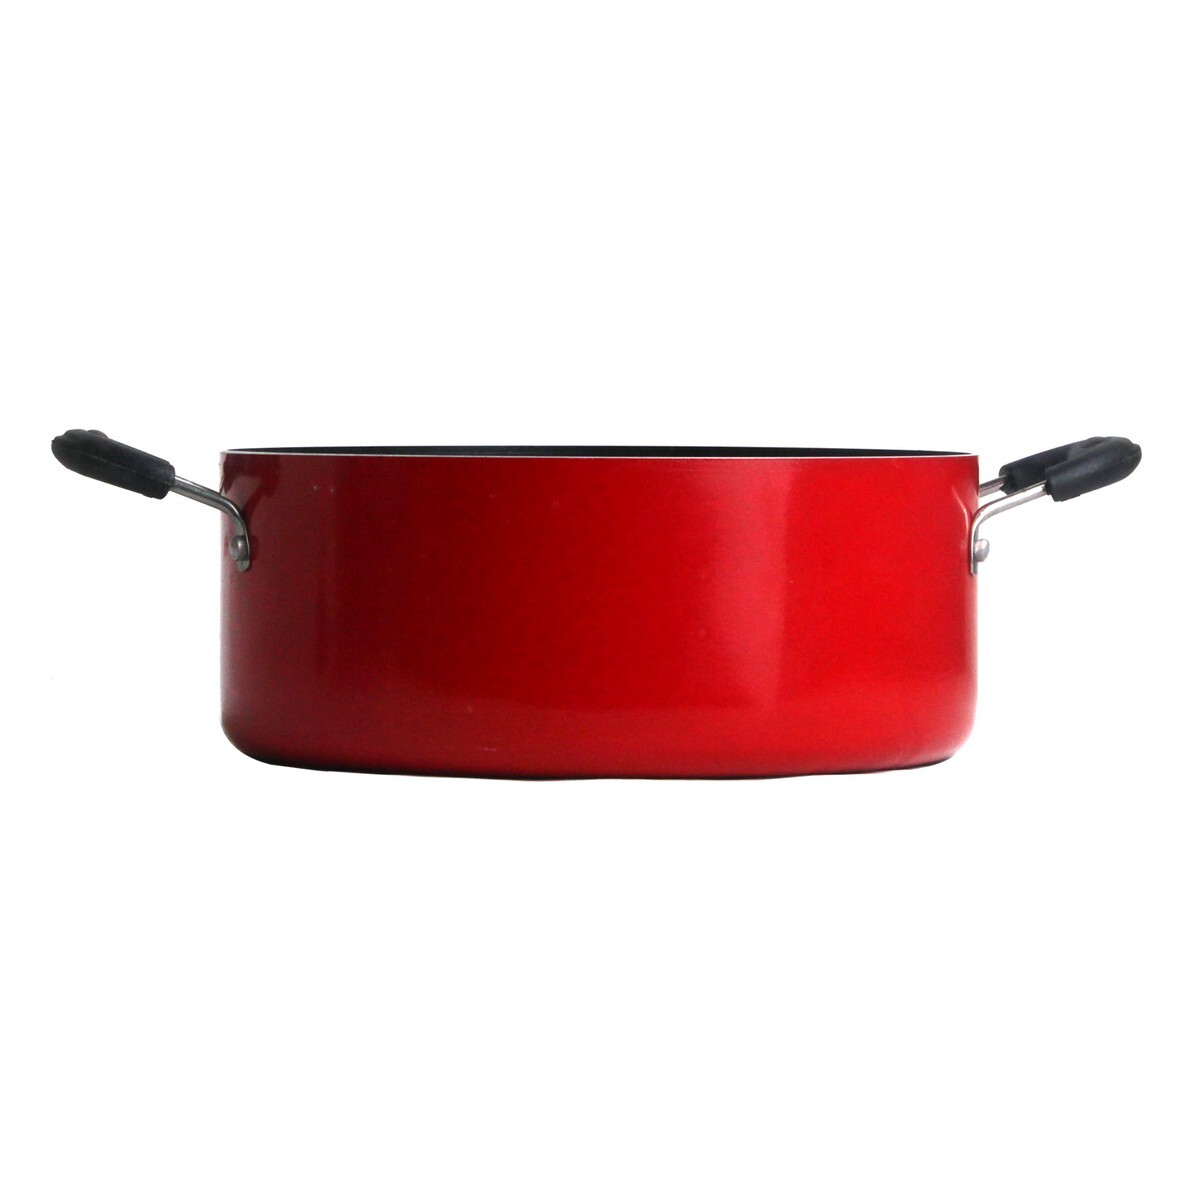 Chefline Non-Stick Casserole + Stainless Steel Steamer With Glass Lid 24cm